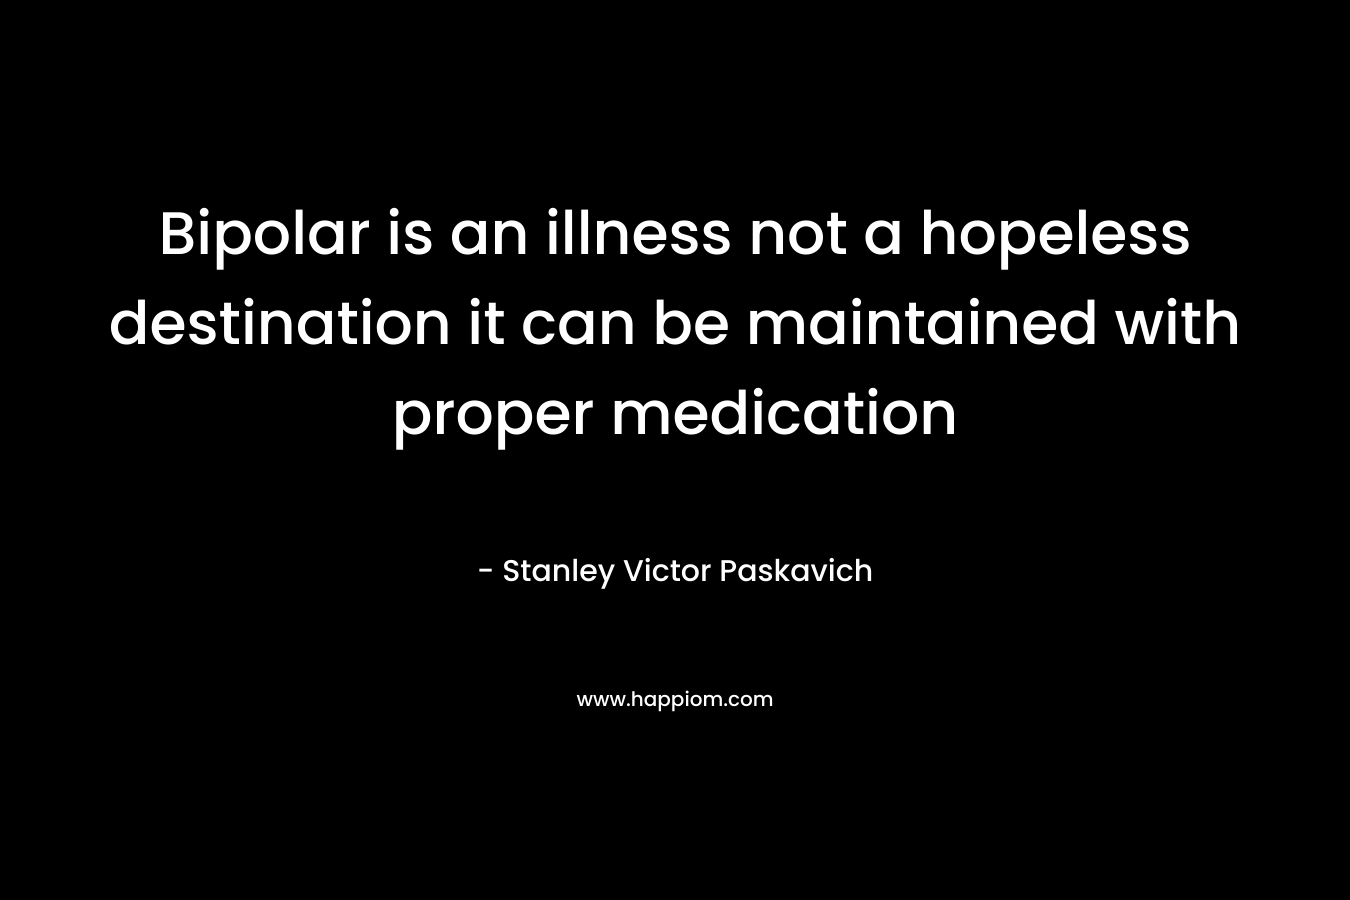 Bipolar is an illness not a hopeless destination it can be maintained with proper medication – Stanley Victor Paskavich